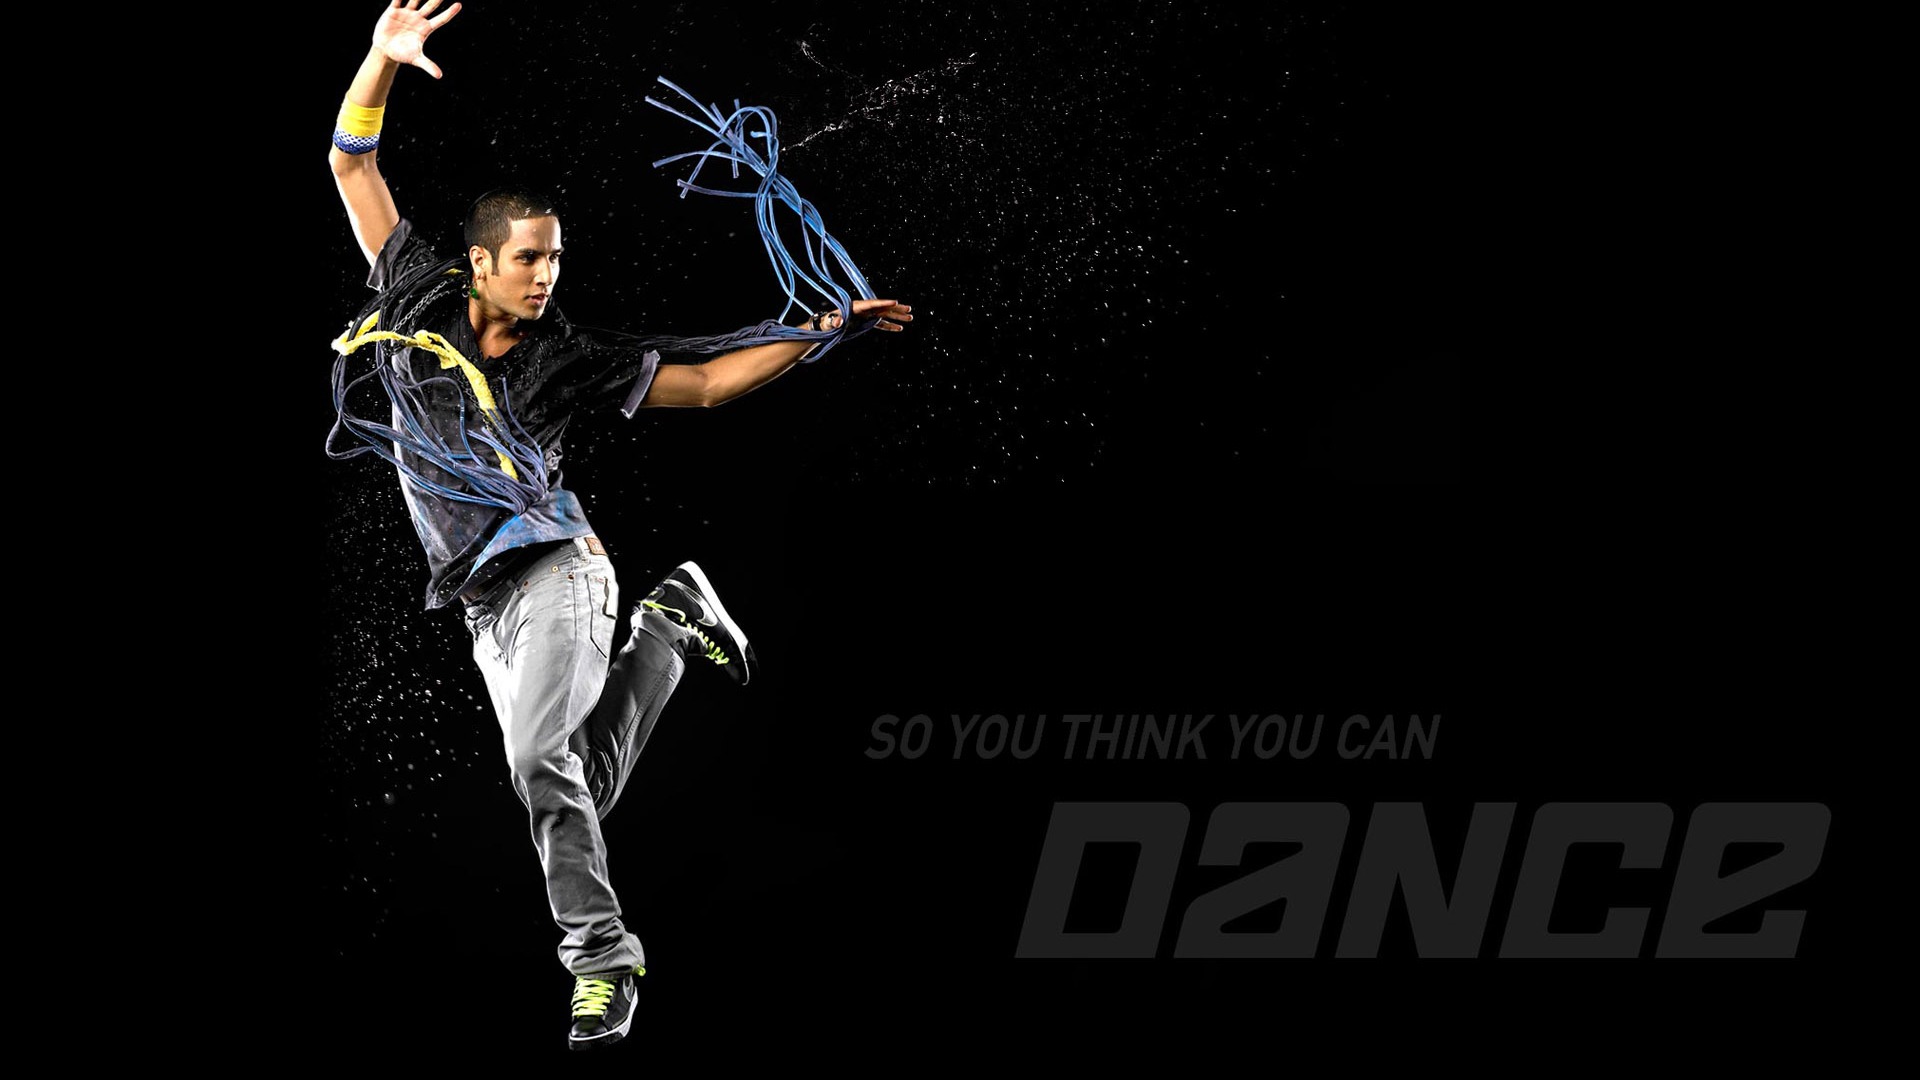 So You Think You Can Dance wallpaper (1) #4 - 1920x1080